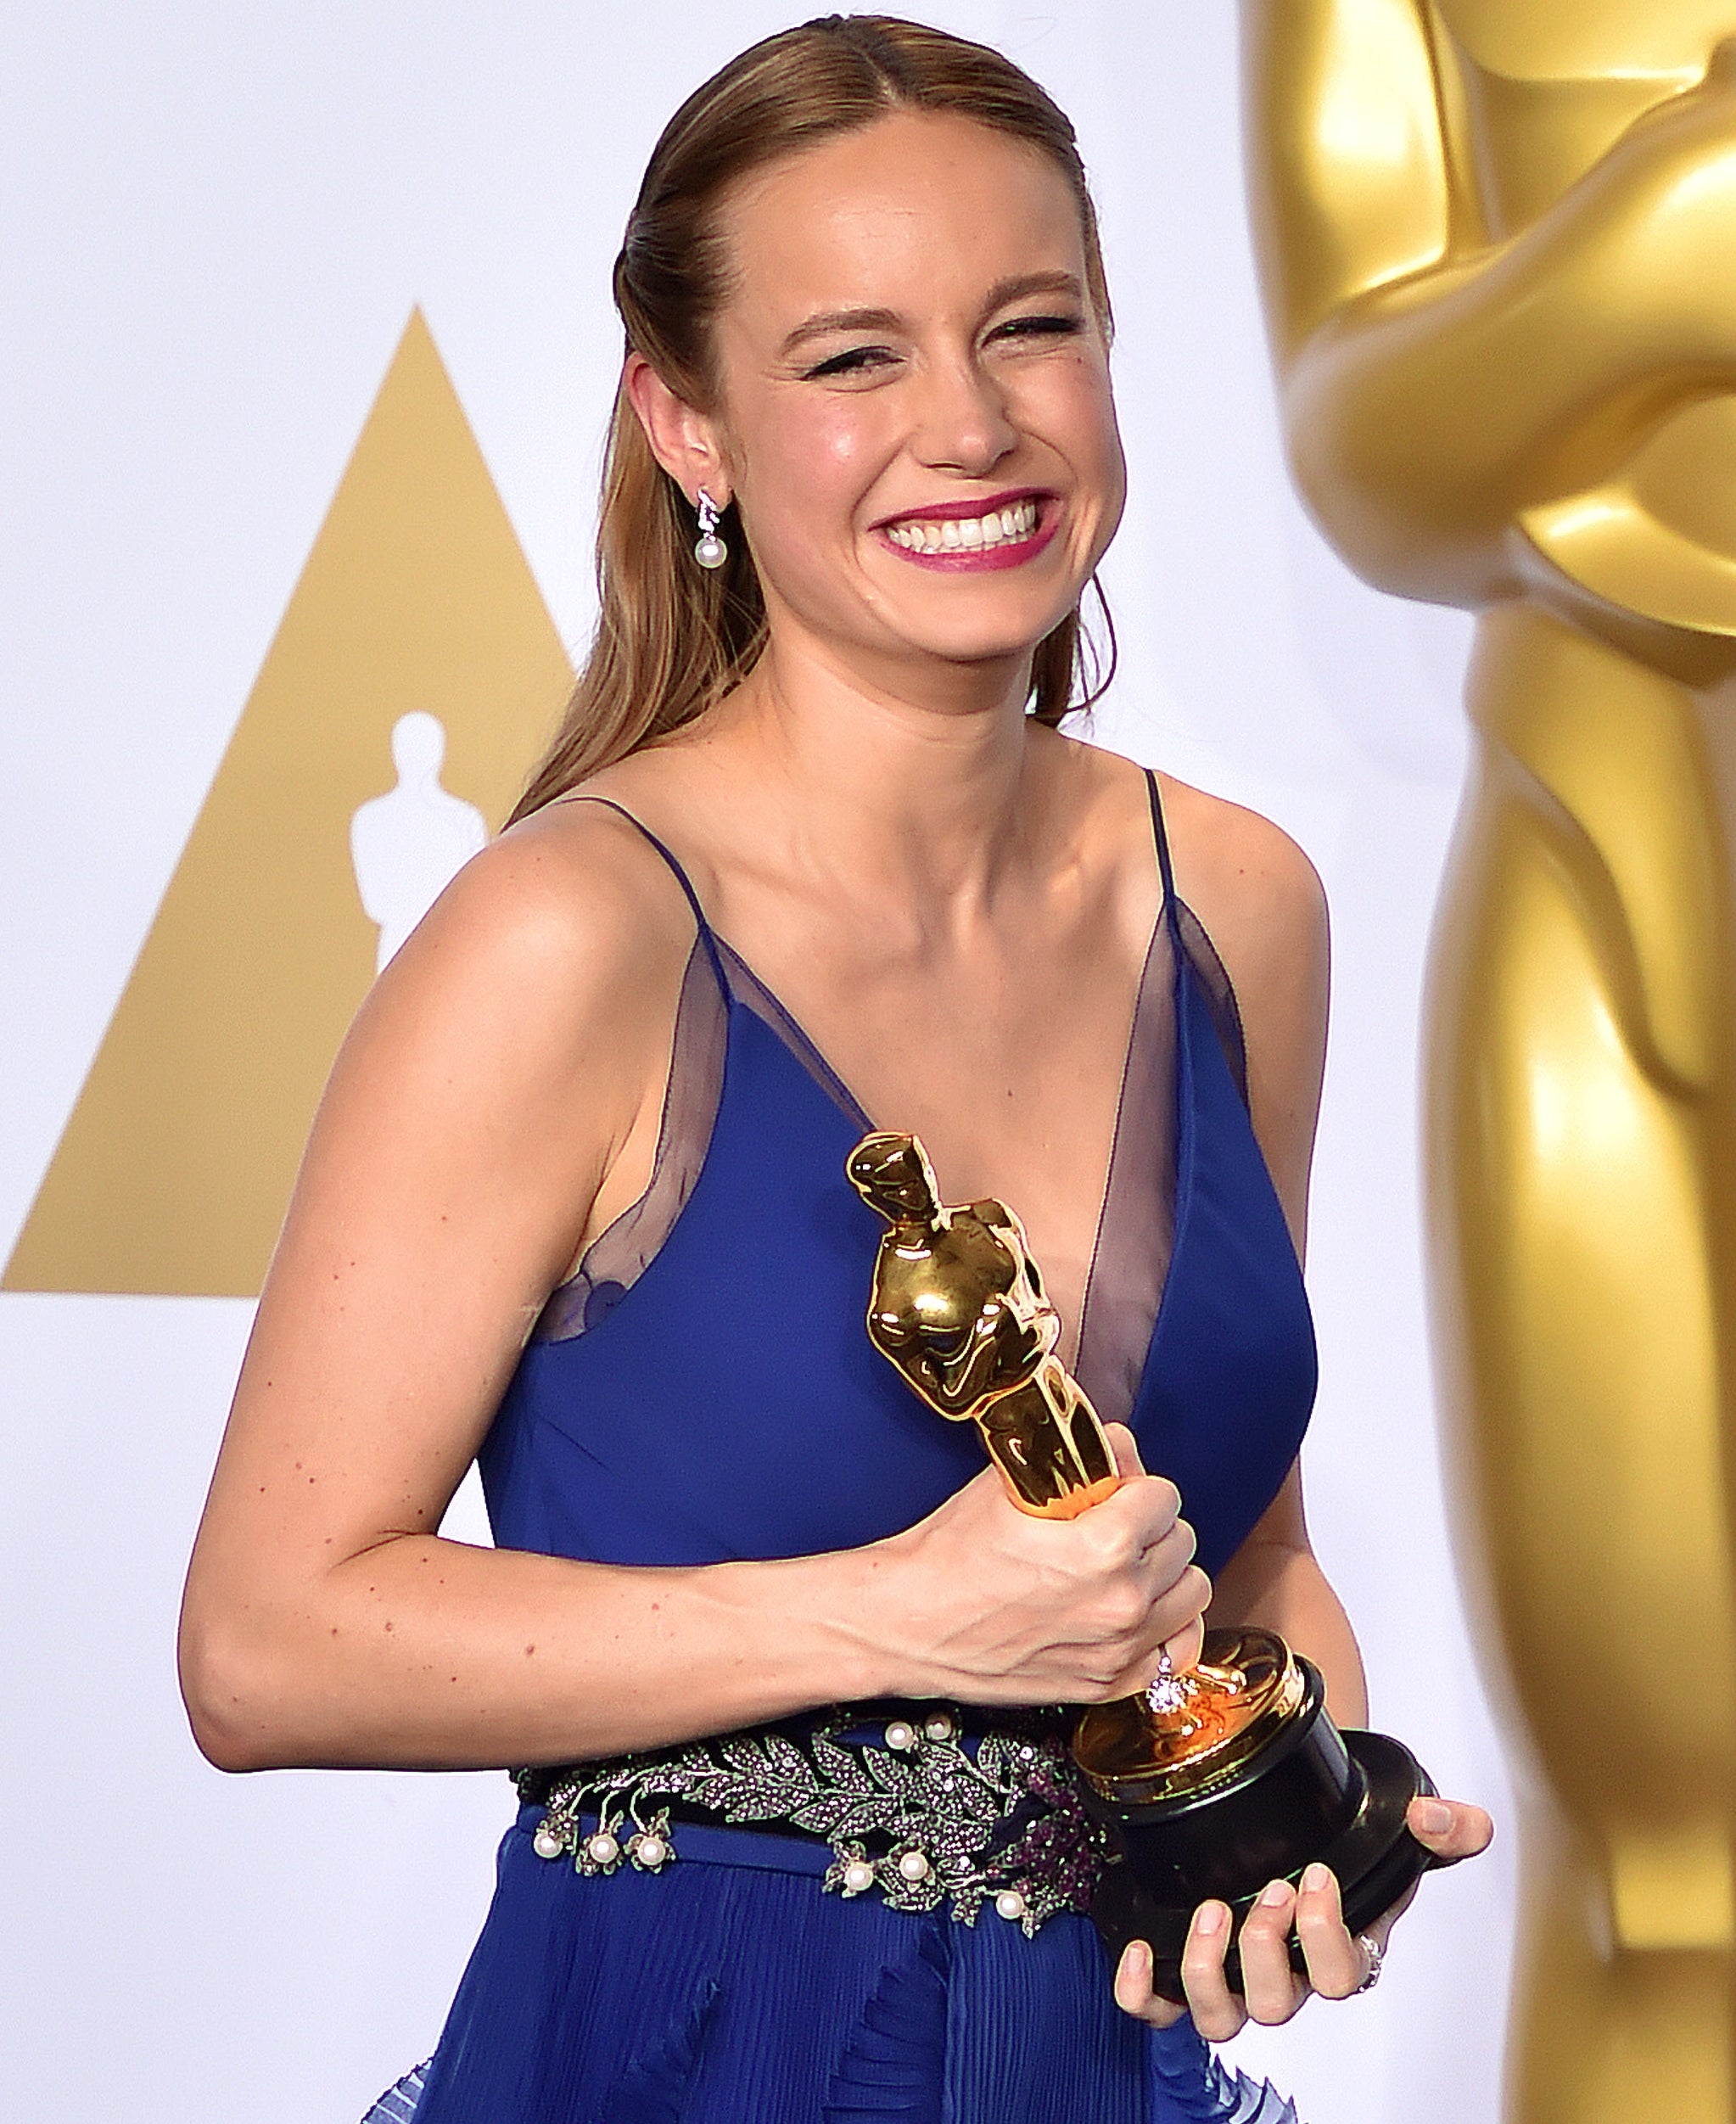 Brie Larson, smiling and holding her Oscar trophy, in a stylish sleeveless gown with floral details